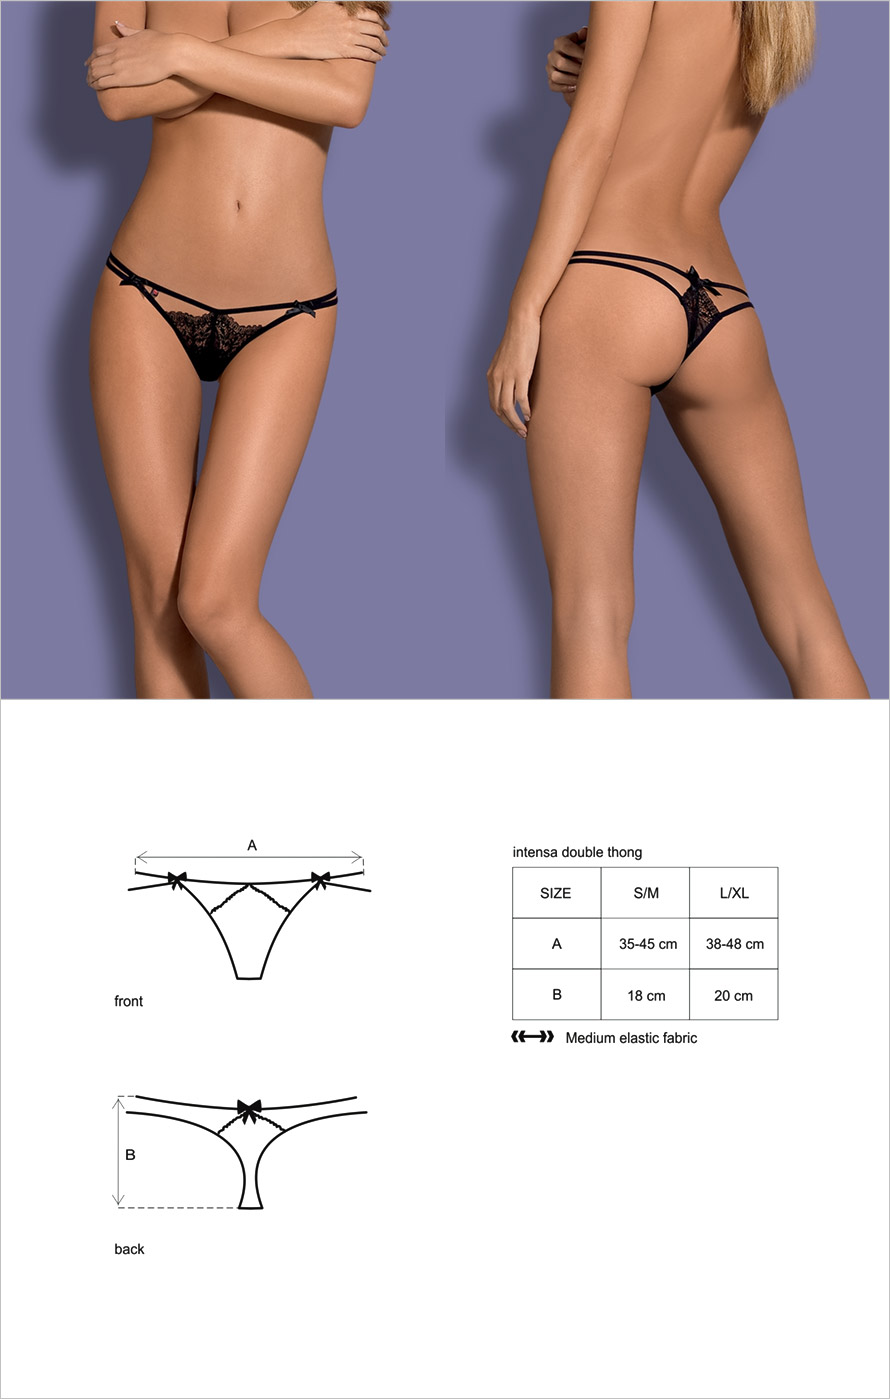 Obsessive Intensa double bands  Thong - Black (S/M)